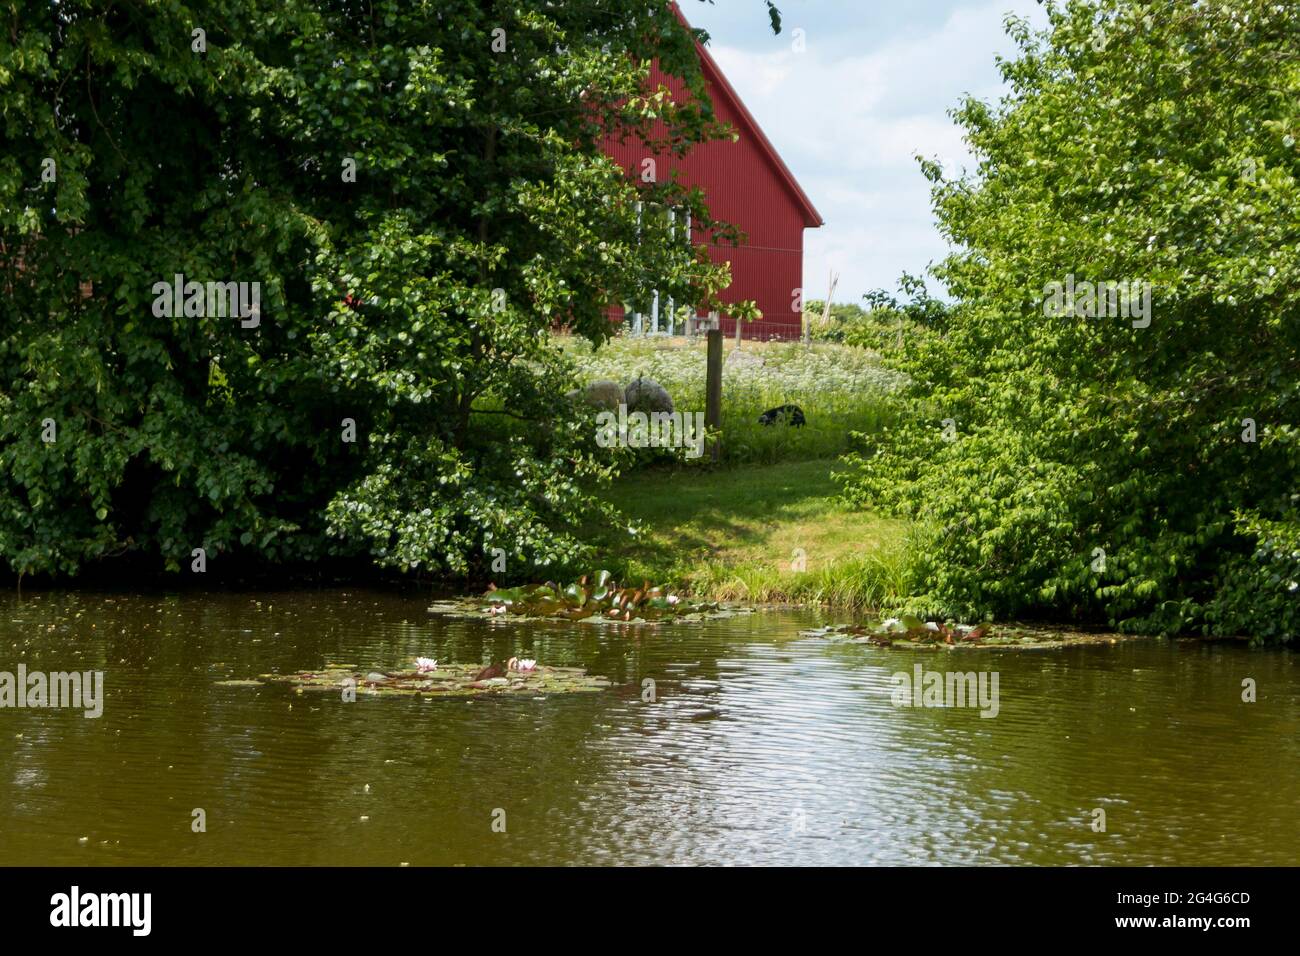 Auning, In the foreground a small lake, in the background are sheep and some barn buildings Stock Photo